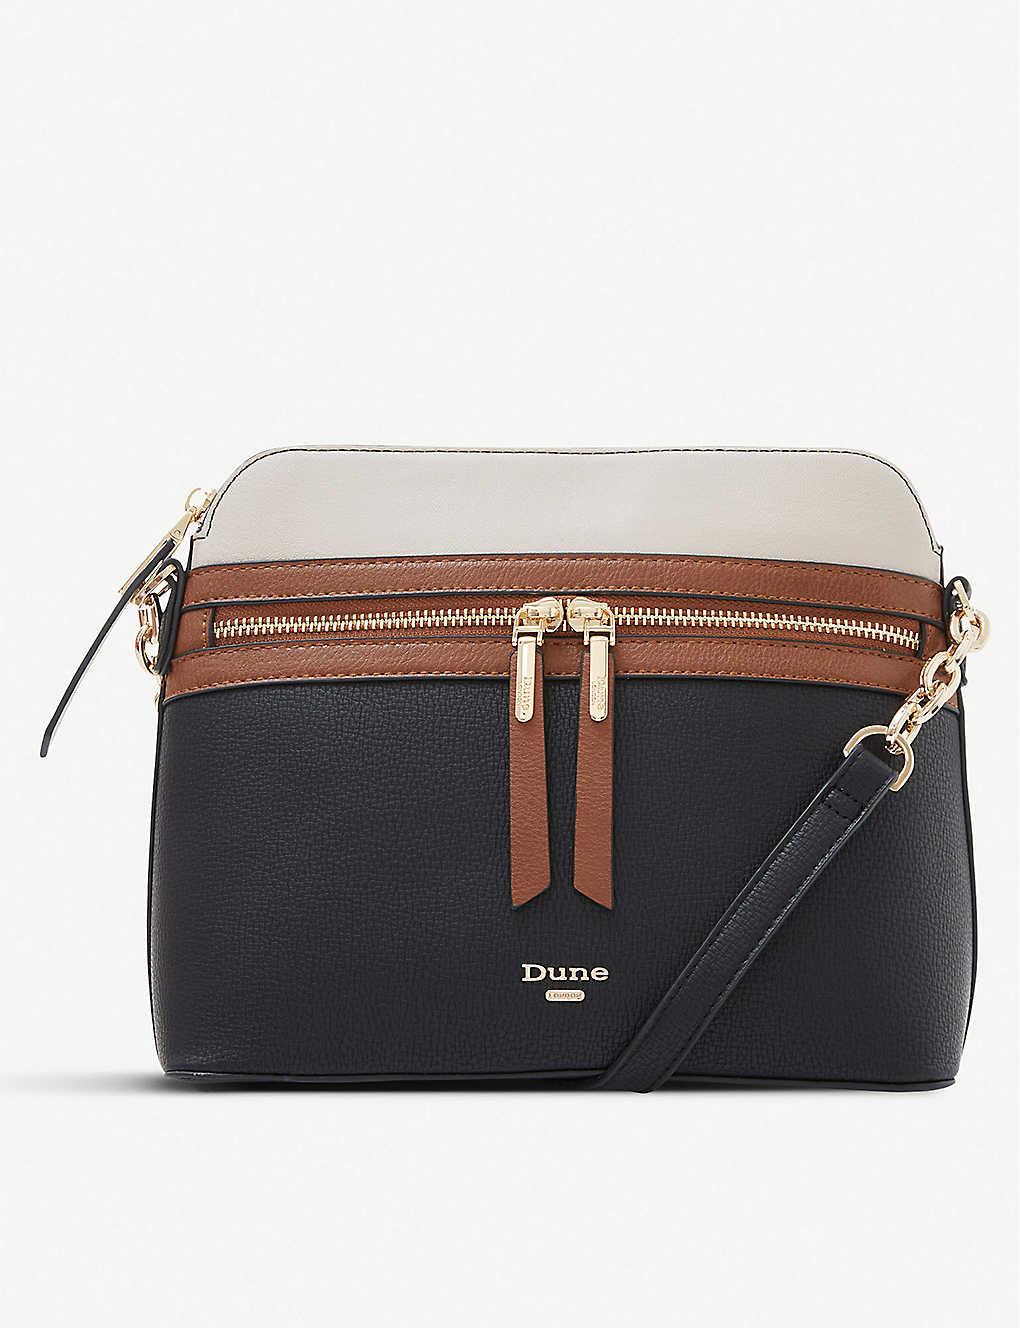 Dune Synthetic Dolive Cross Body Bag in Black - Lyst